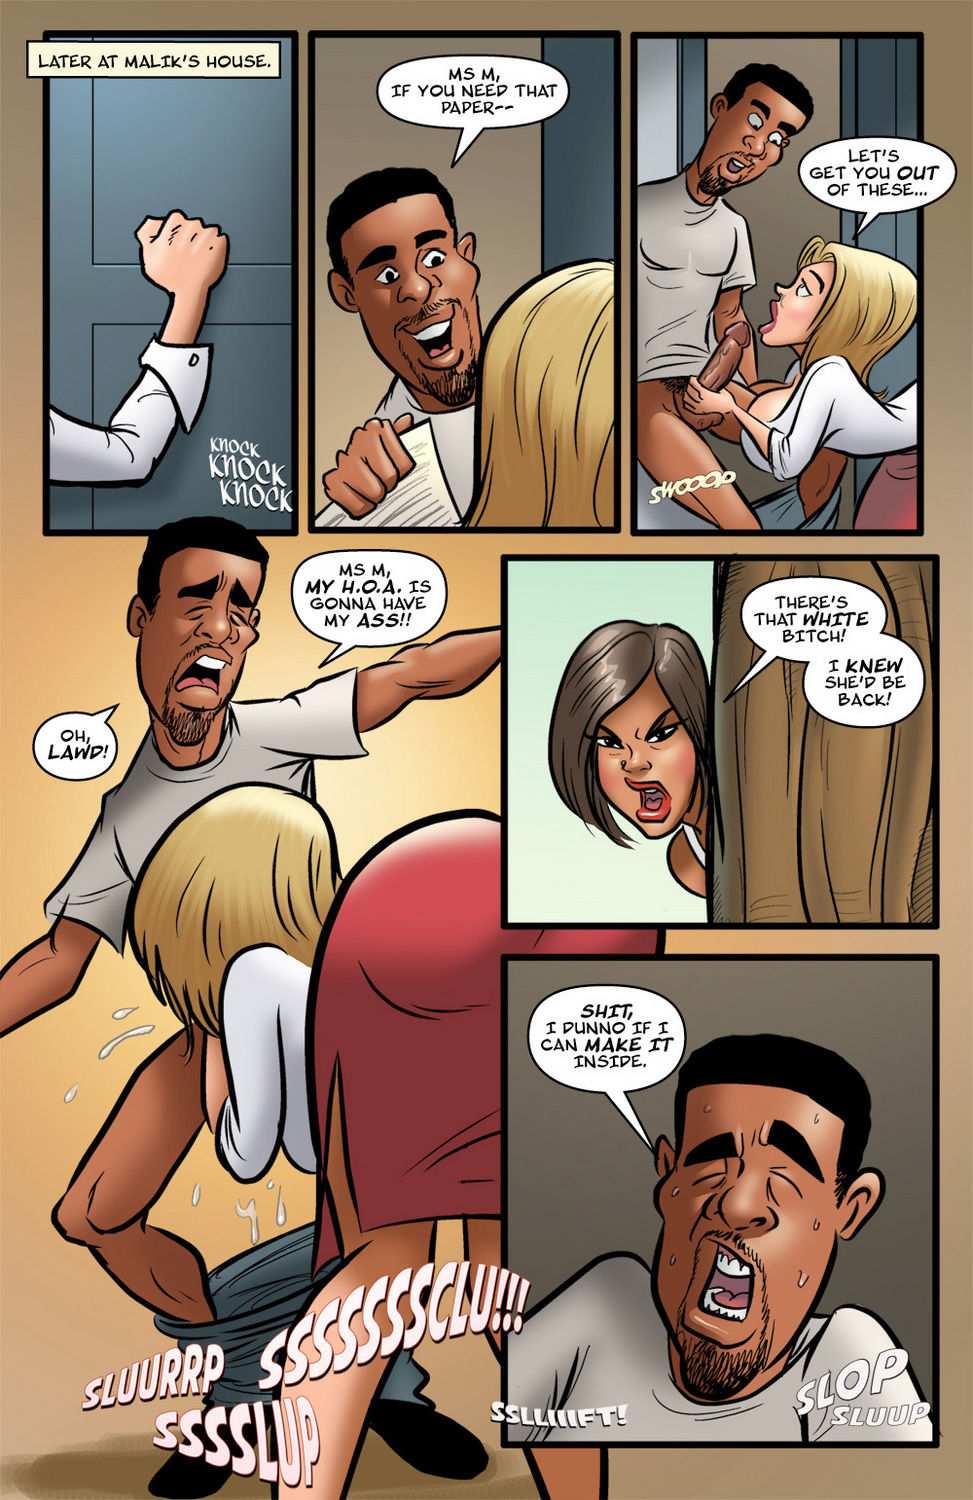 A BackDoor To Heaven 3 - John Persons page 7